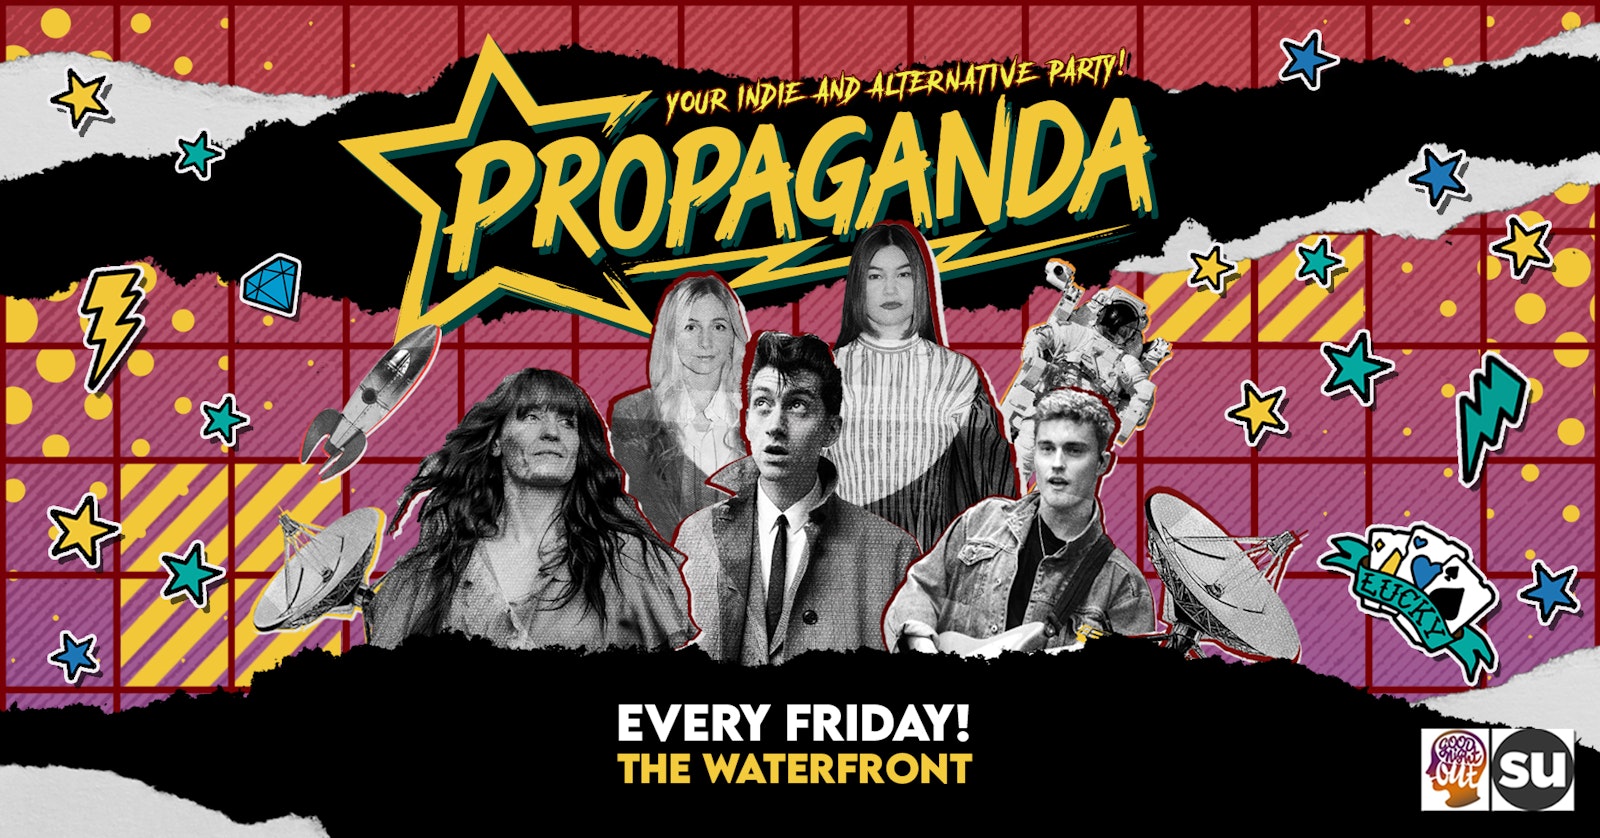 Propaganda Norwich – Your Indie and Alternative Party at The Waterfront